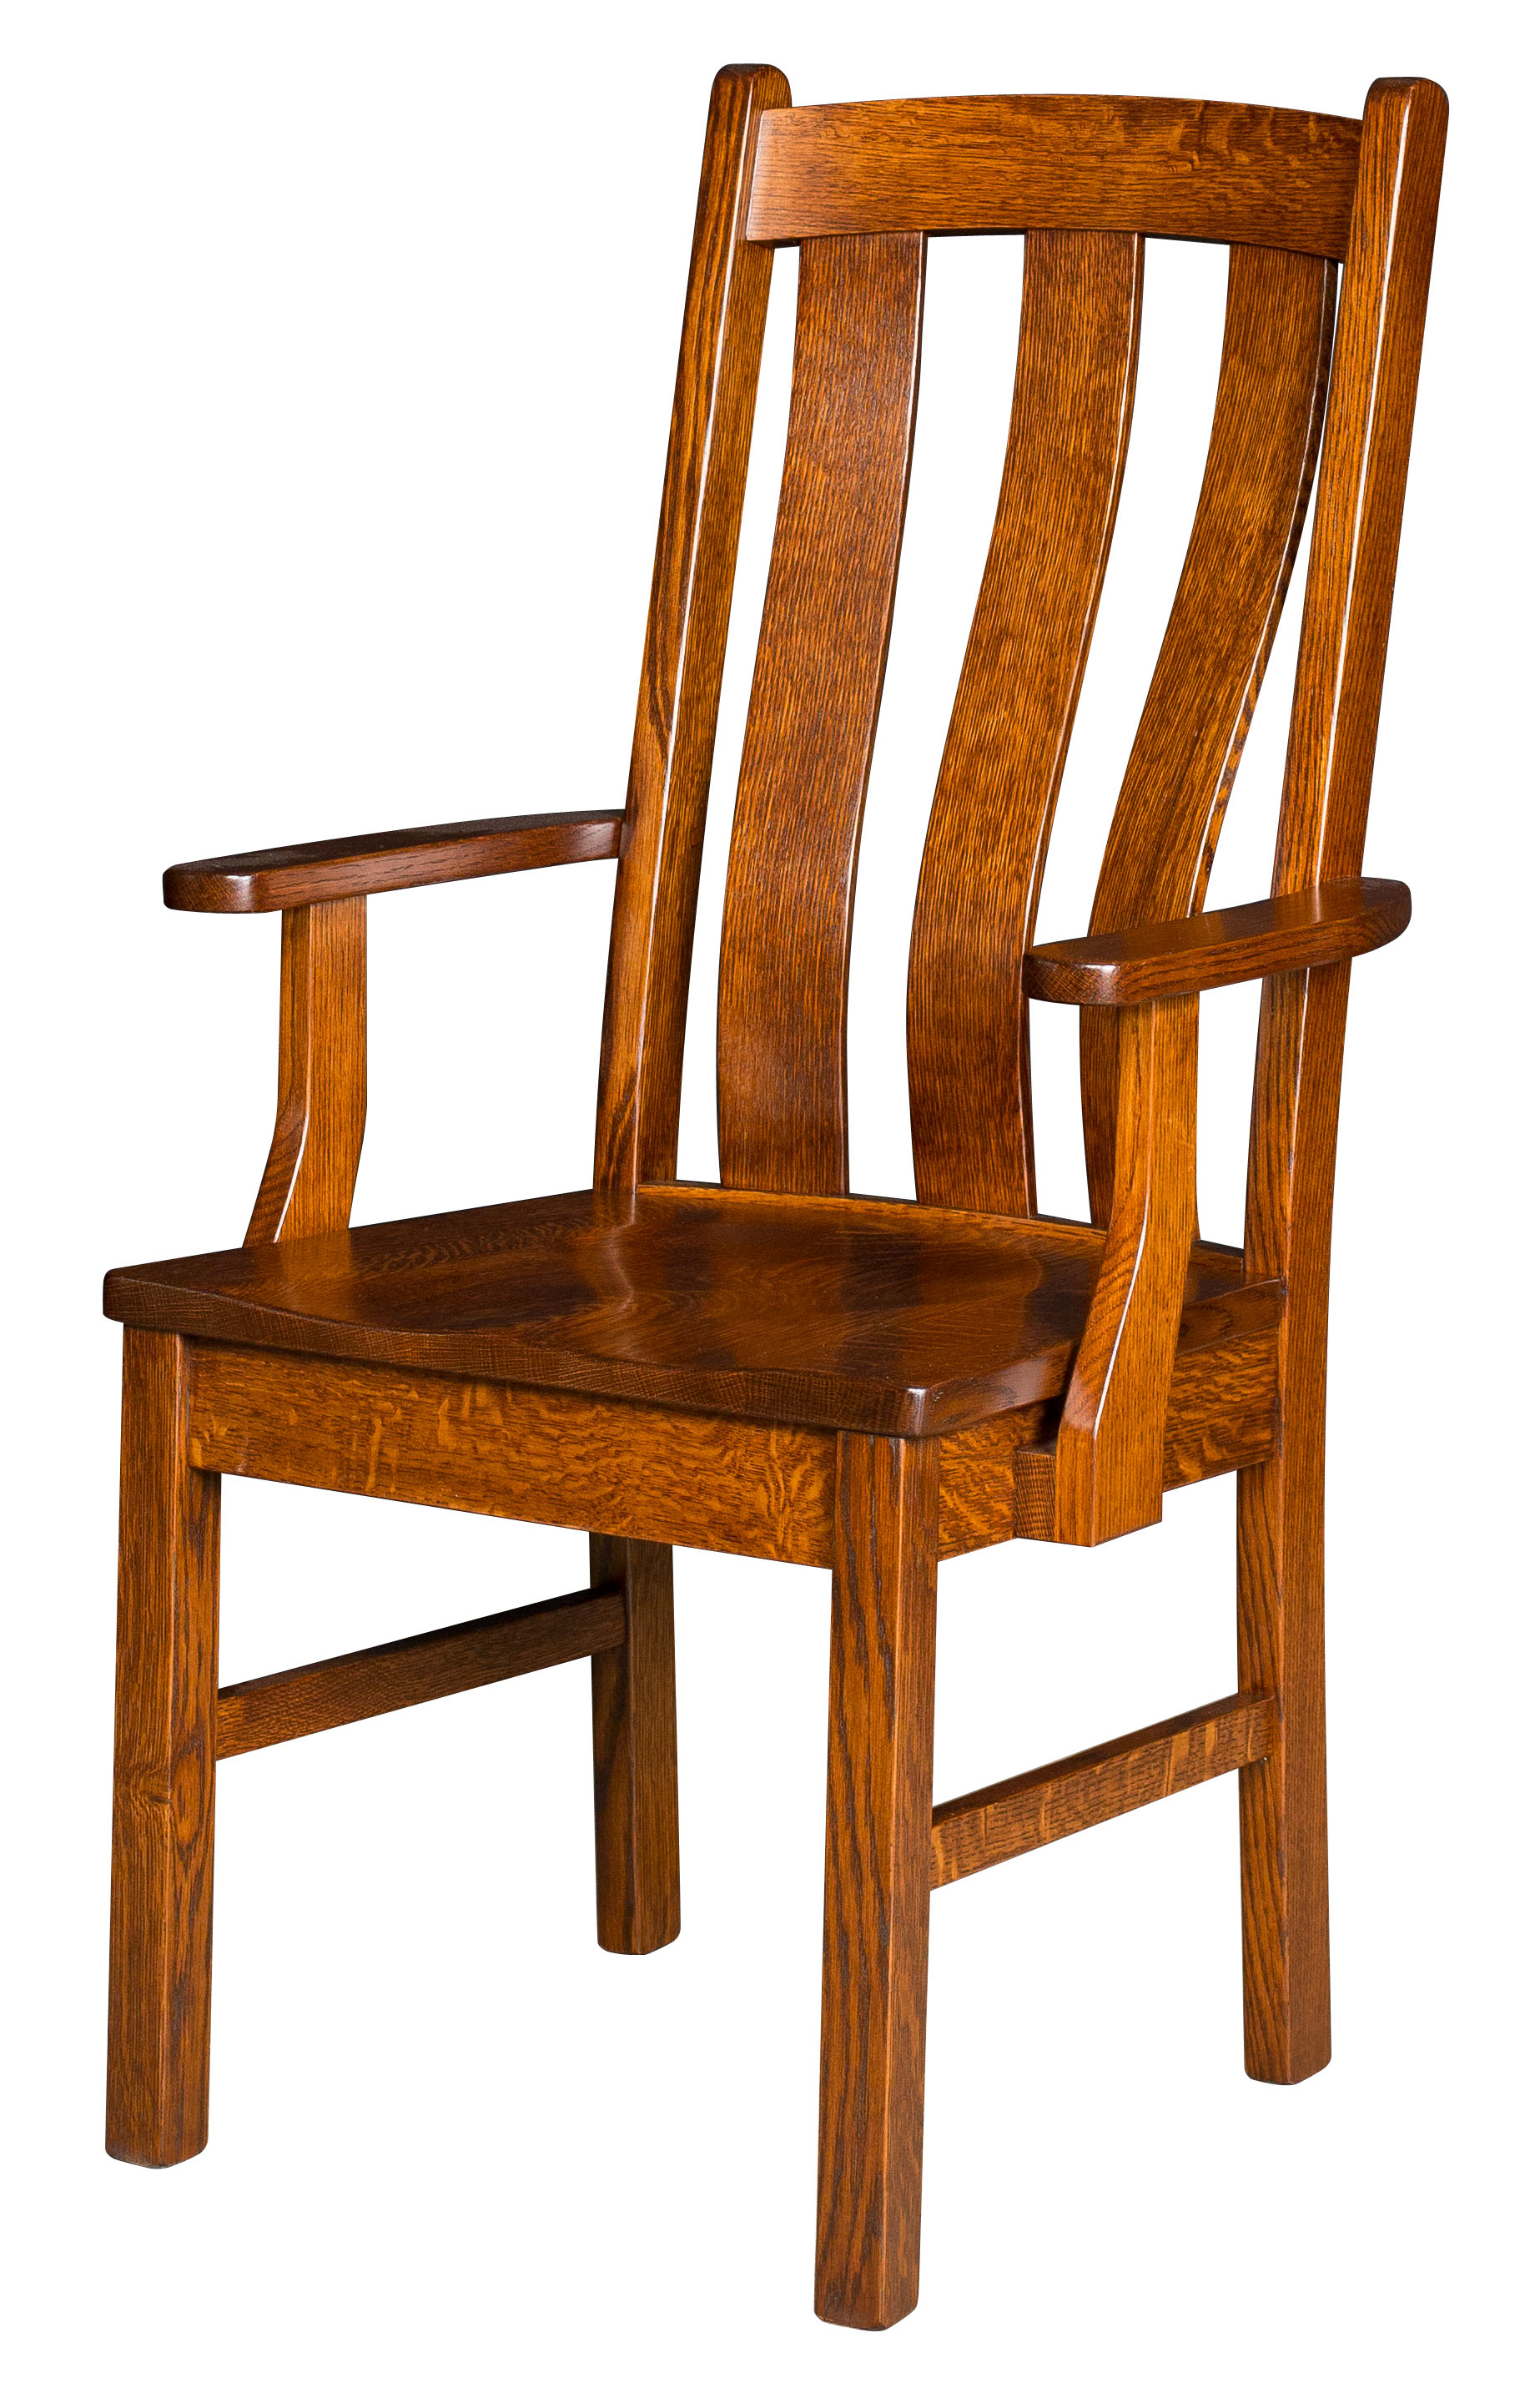 Vancouver Dining Chair – Wheatstate Wood Design